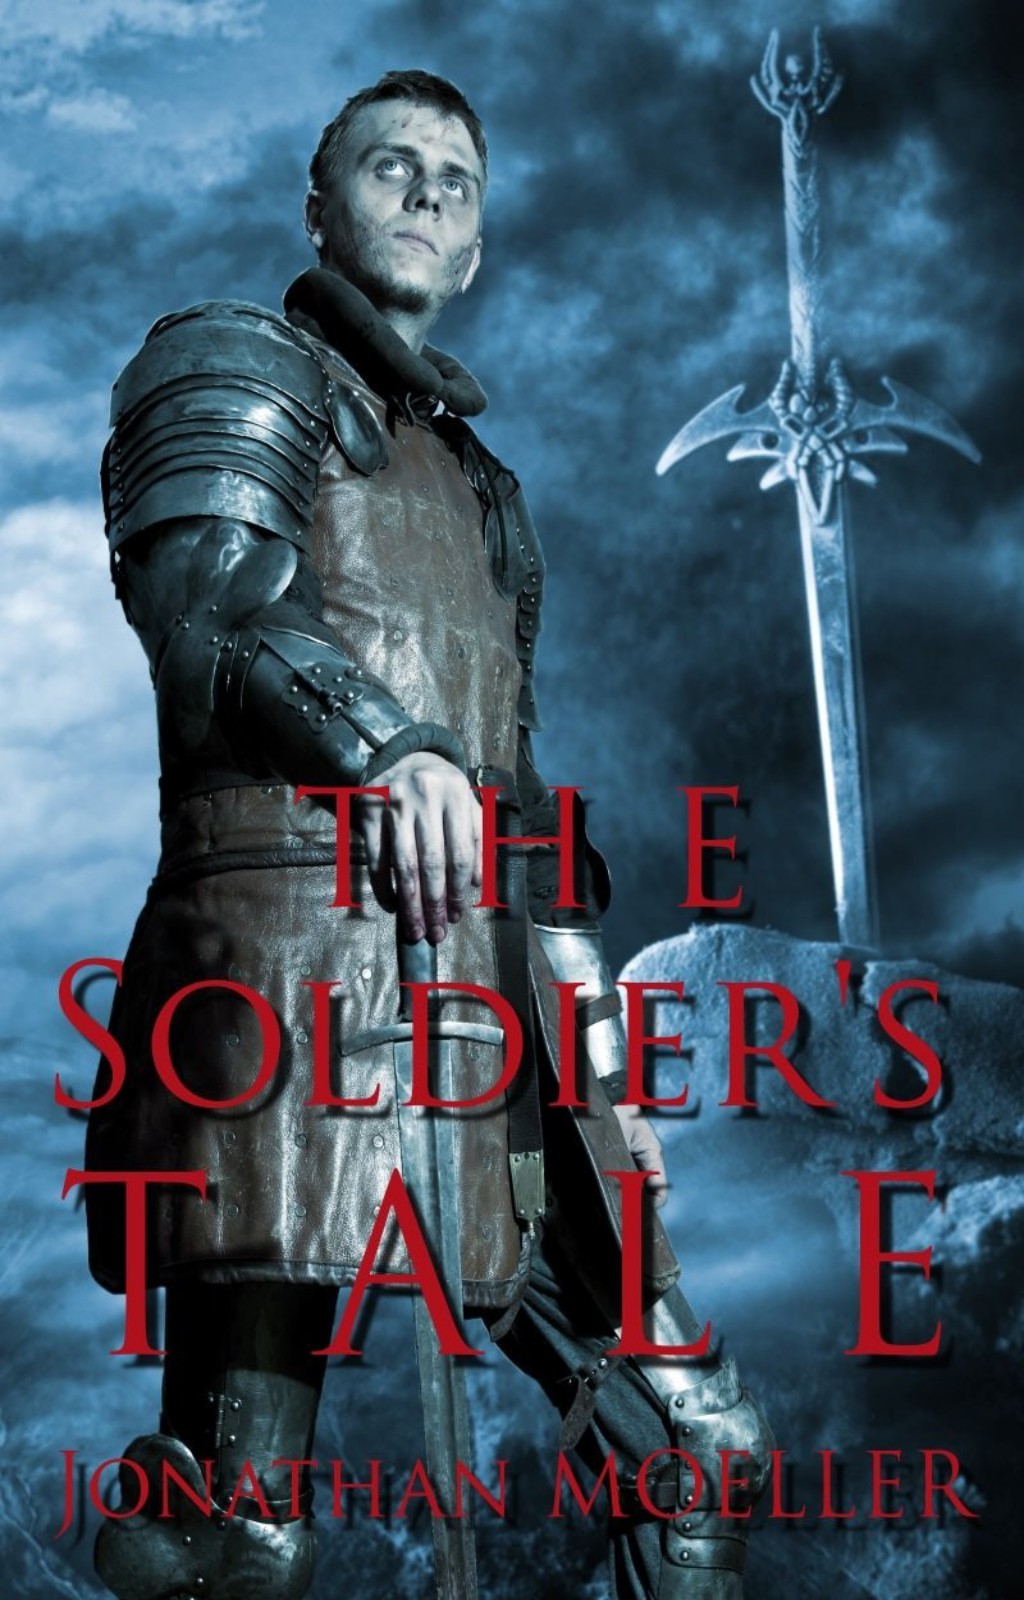 The Soldier's Tale by Jonathan Moeller